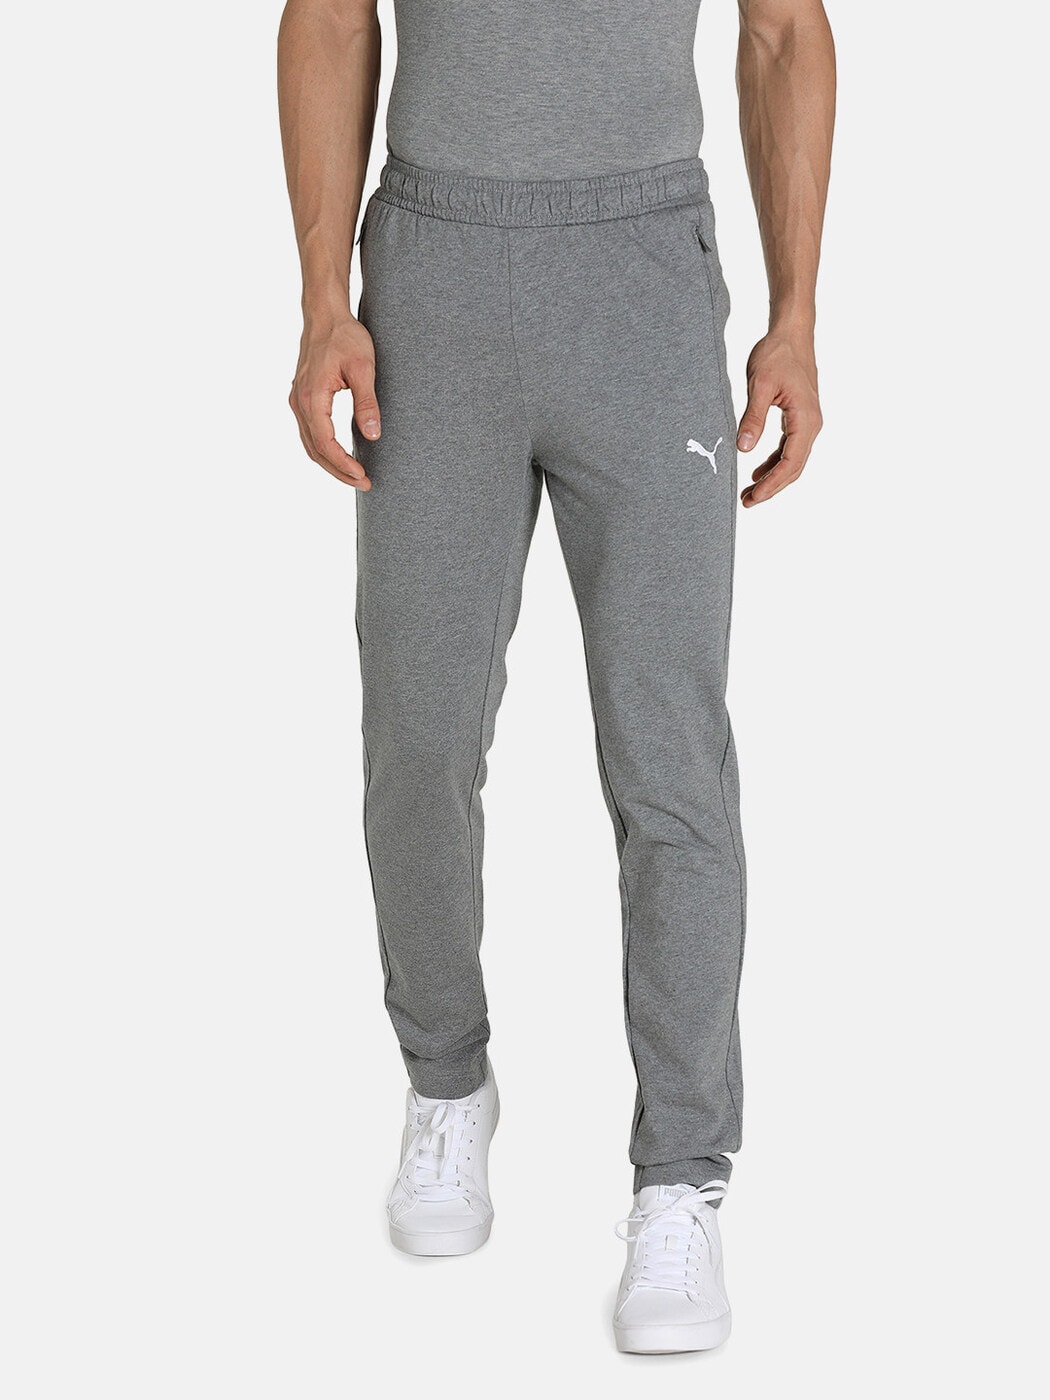 Buy Puma Men Grey Solid Energy Knit DRYCELL Track Pants - Track Pants for  Men 8750409 | Myntra